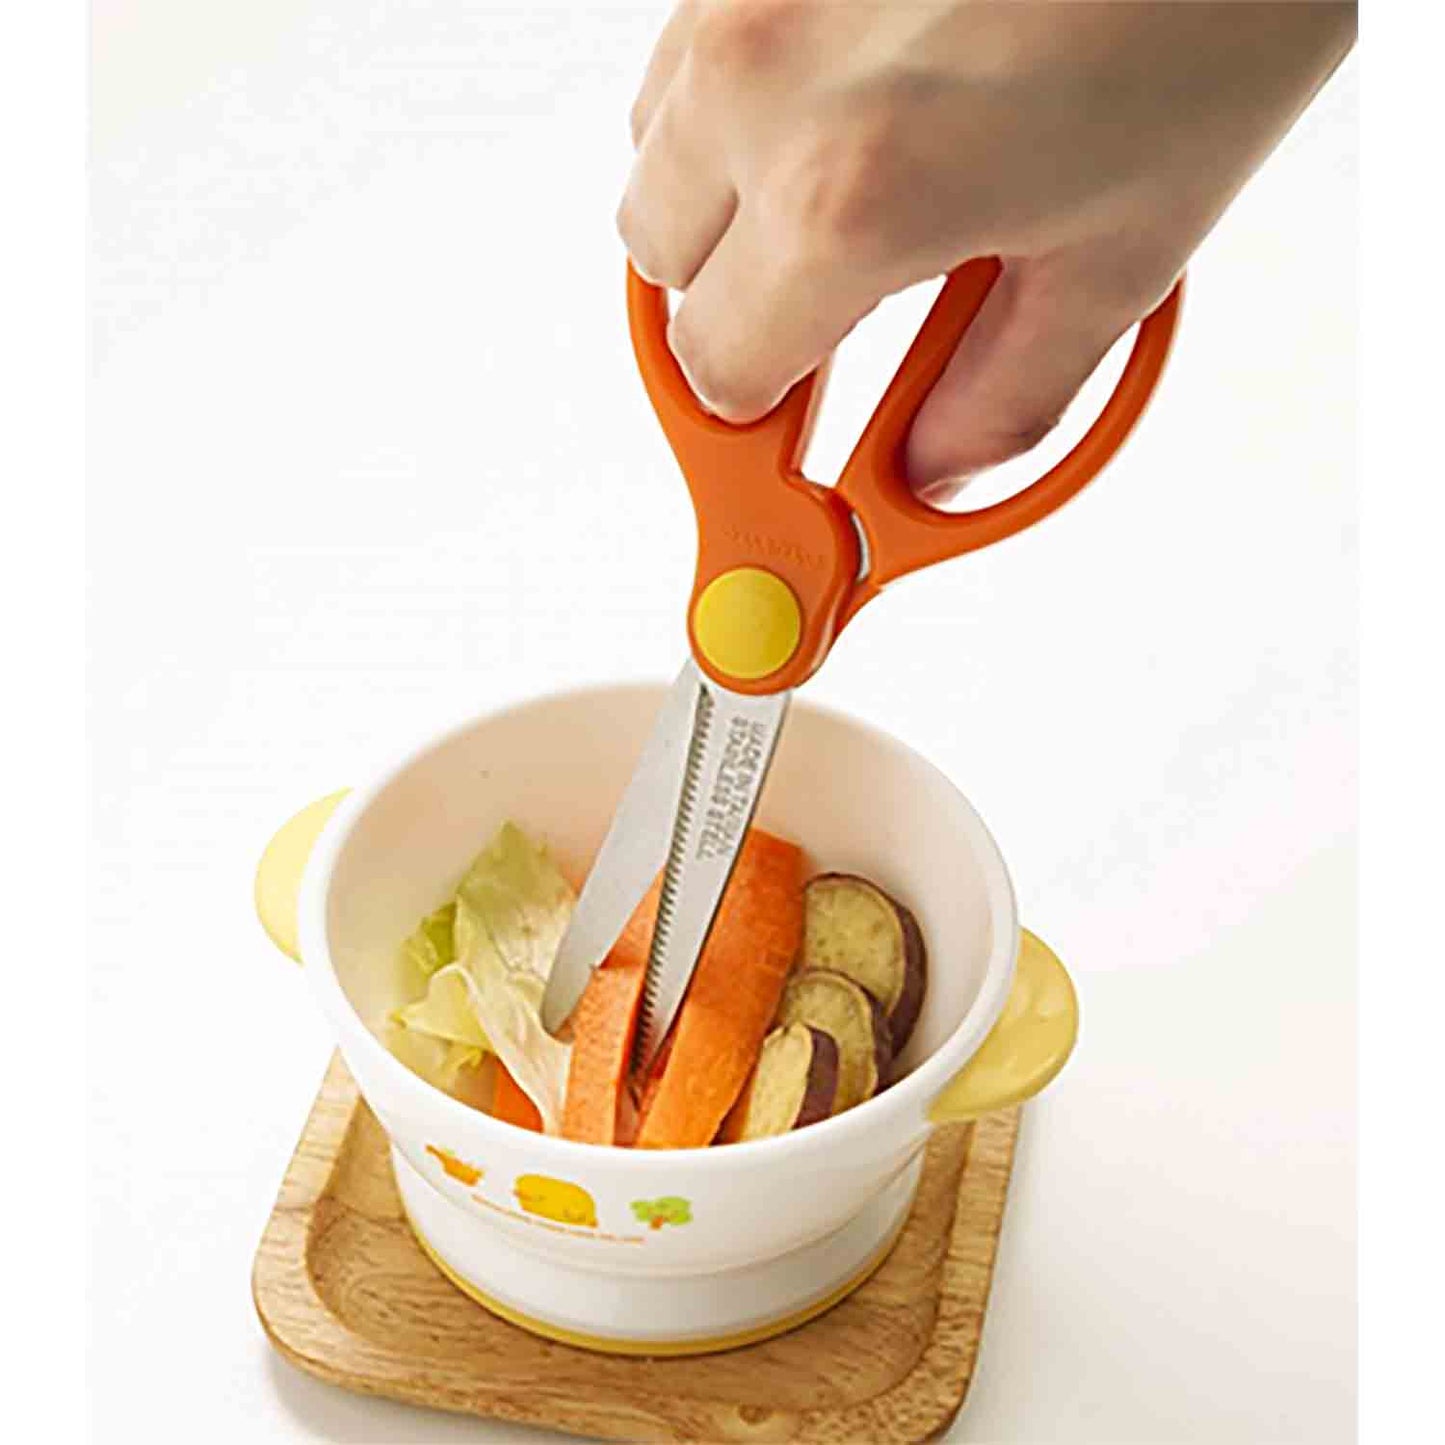 Multi-Functional Food Scissors(Without Packing)